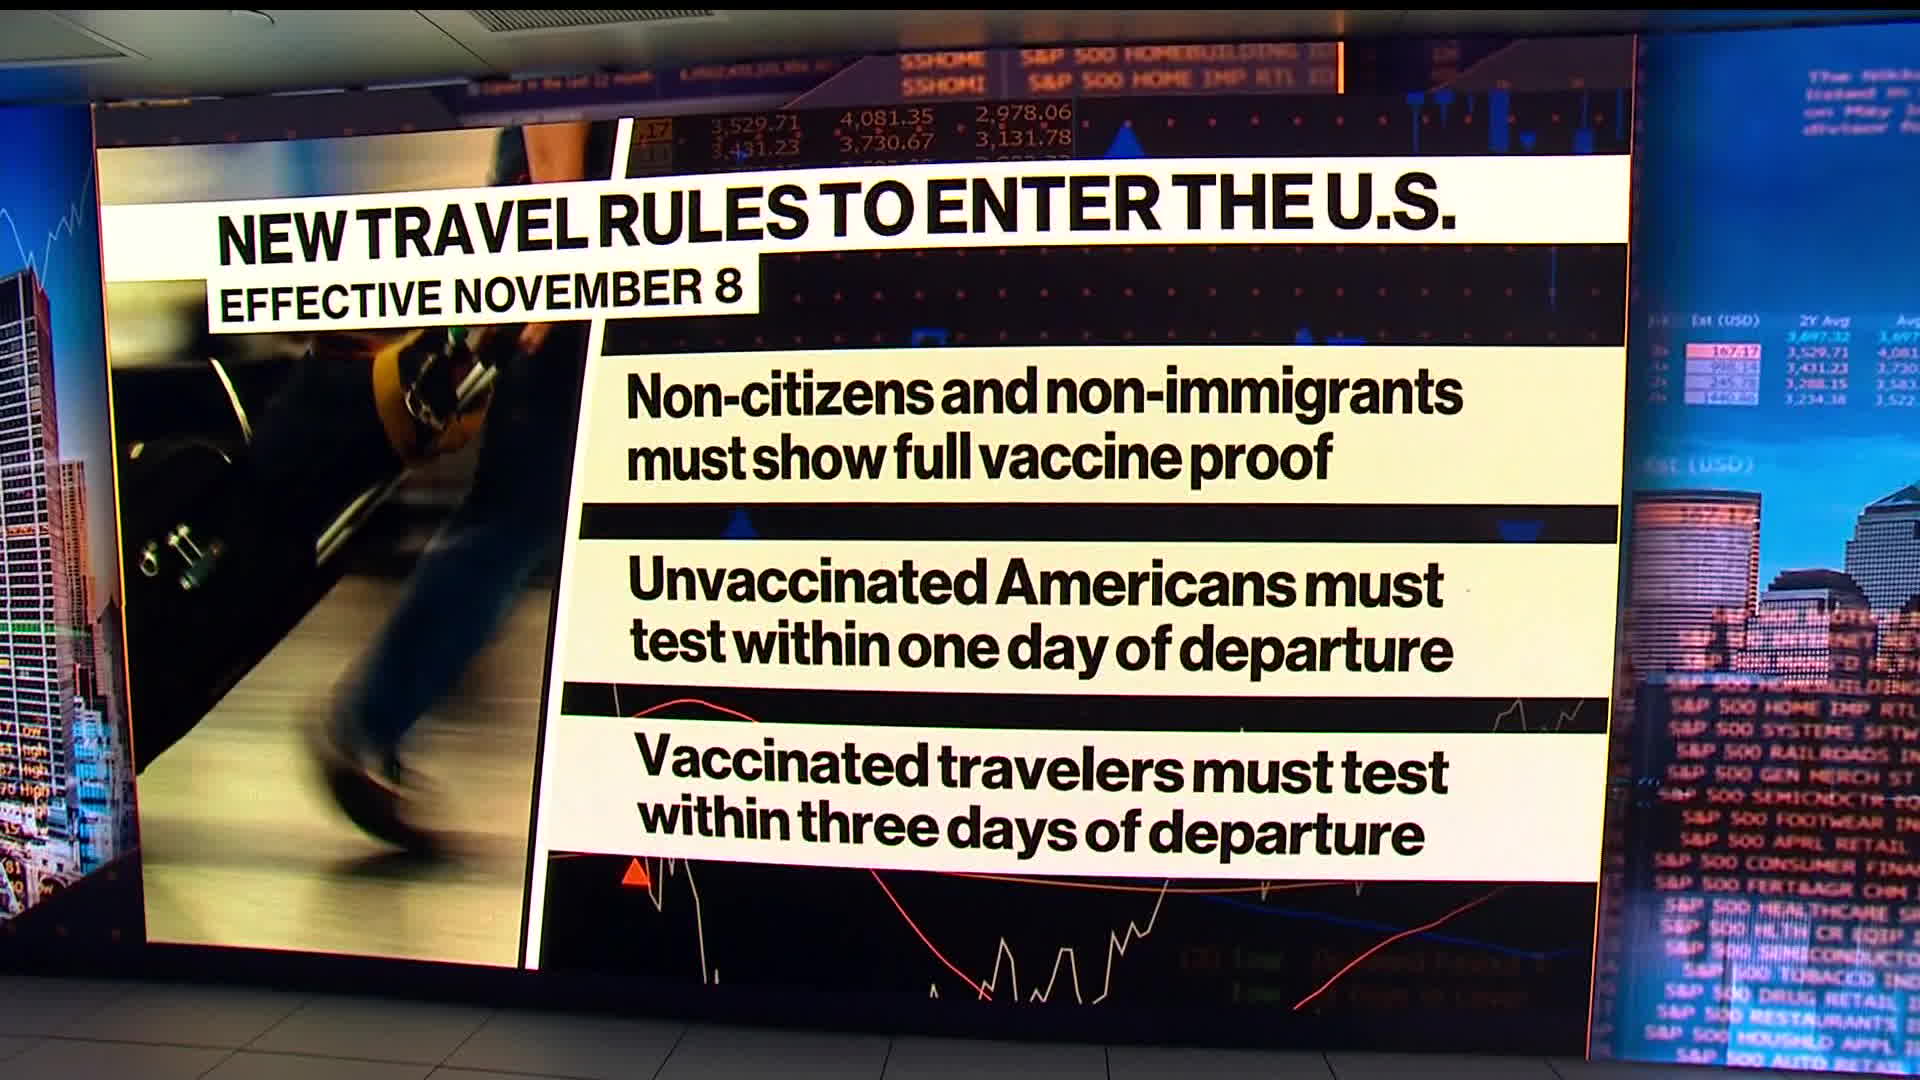 white house us travel restrictions